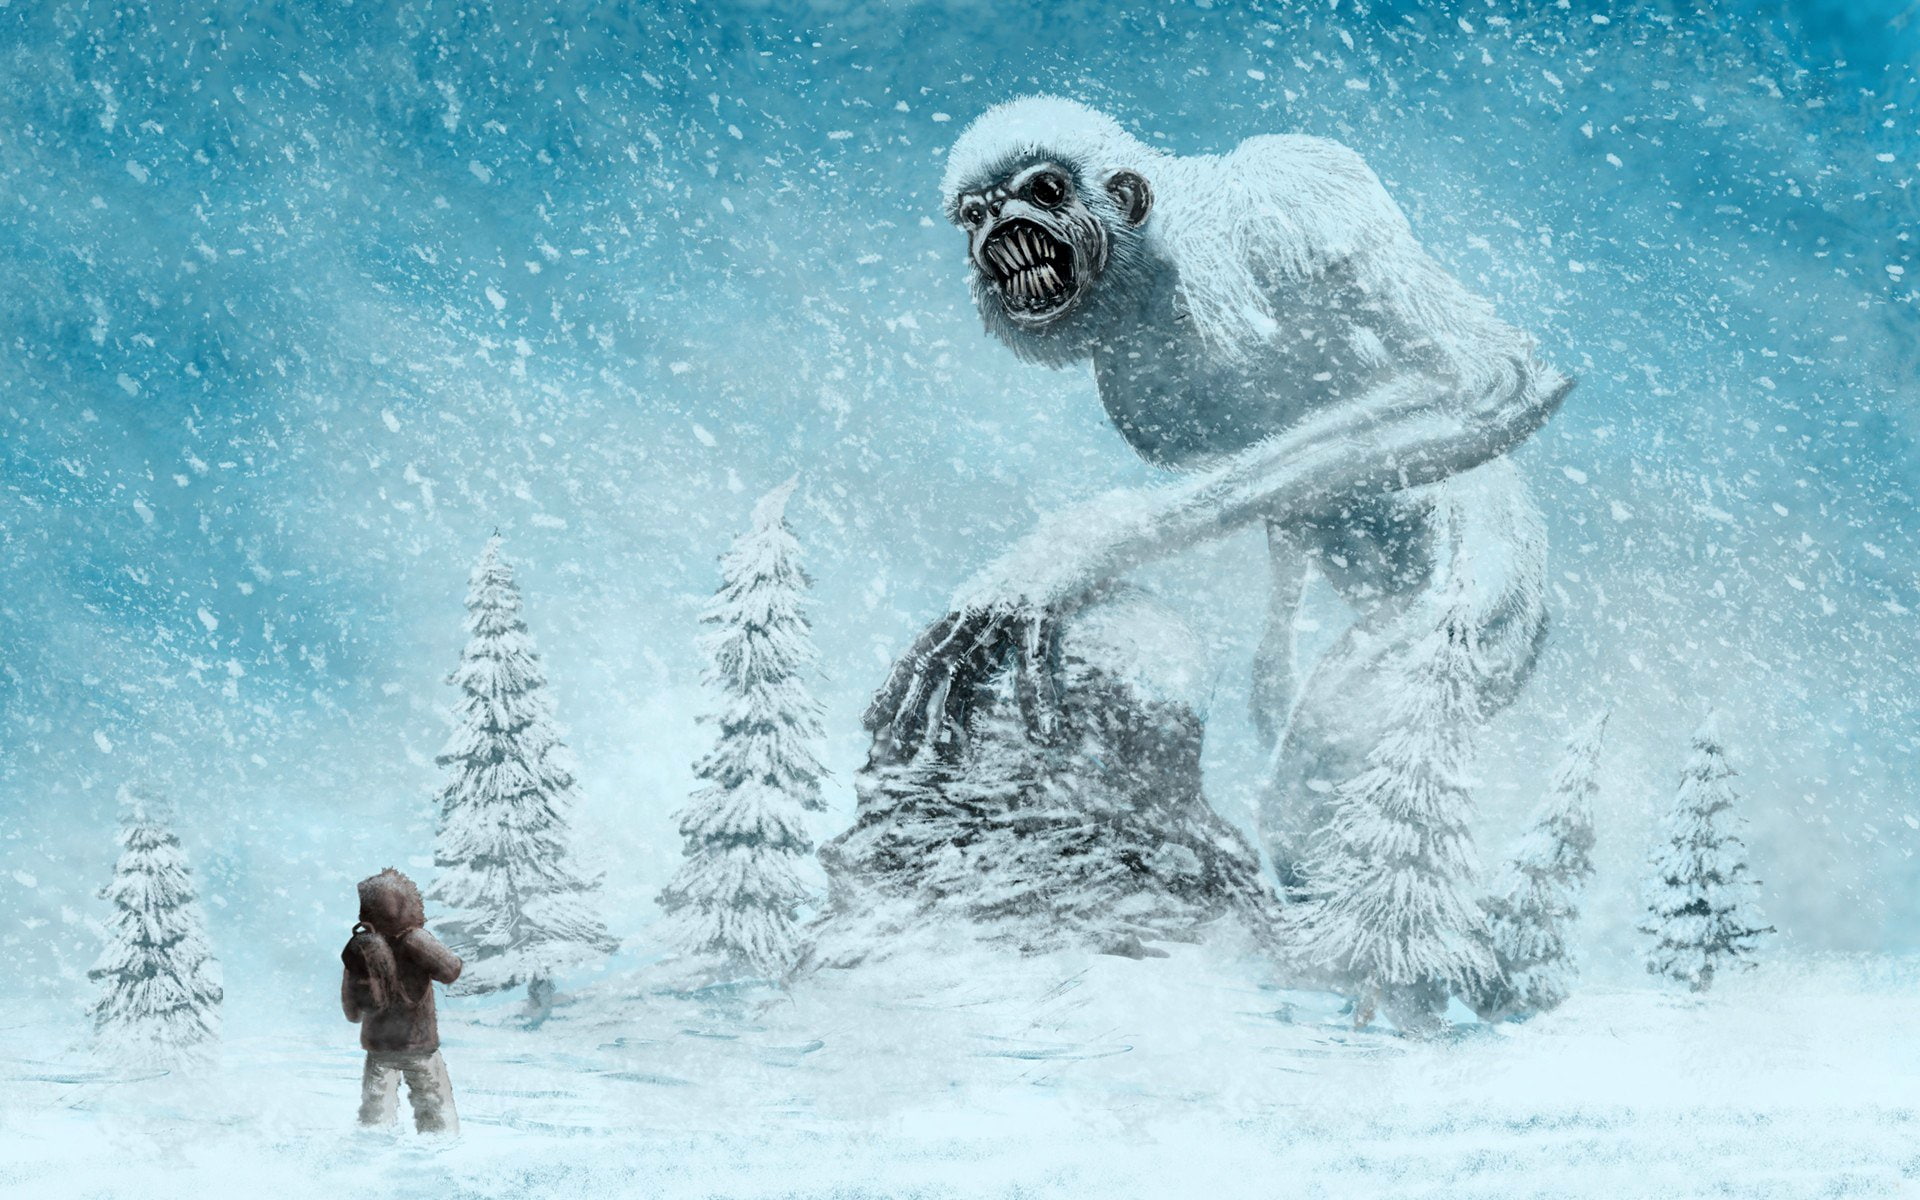 beings, fantasy, monster, snow, supernatural, yeti, cold temperature